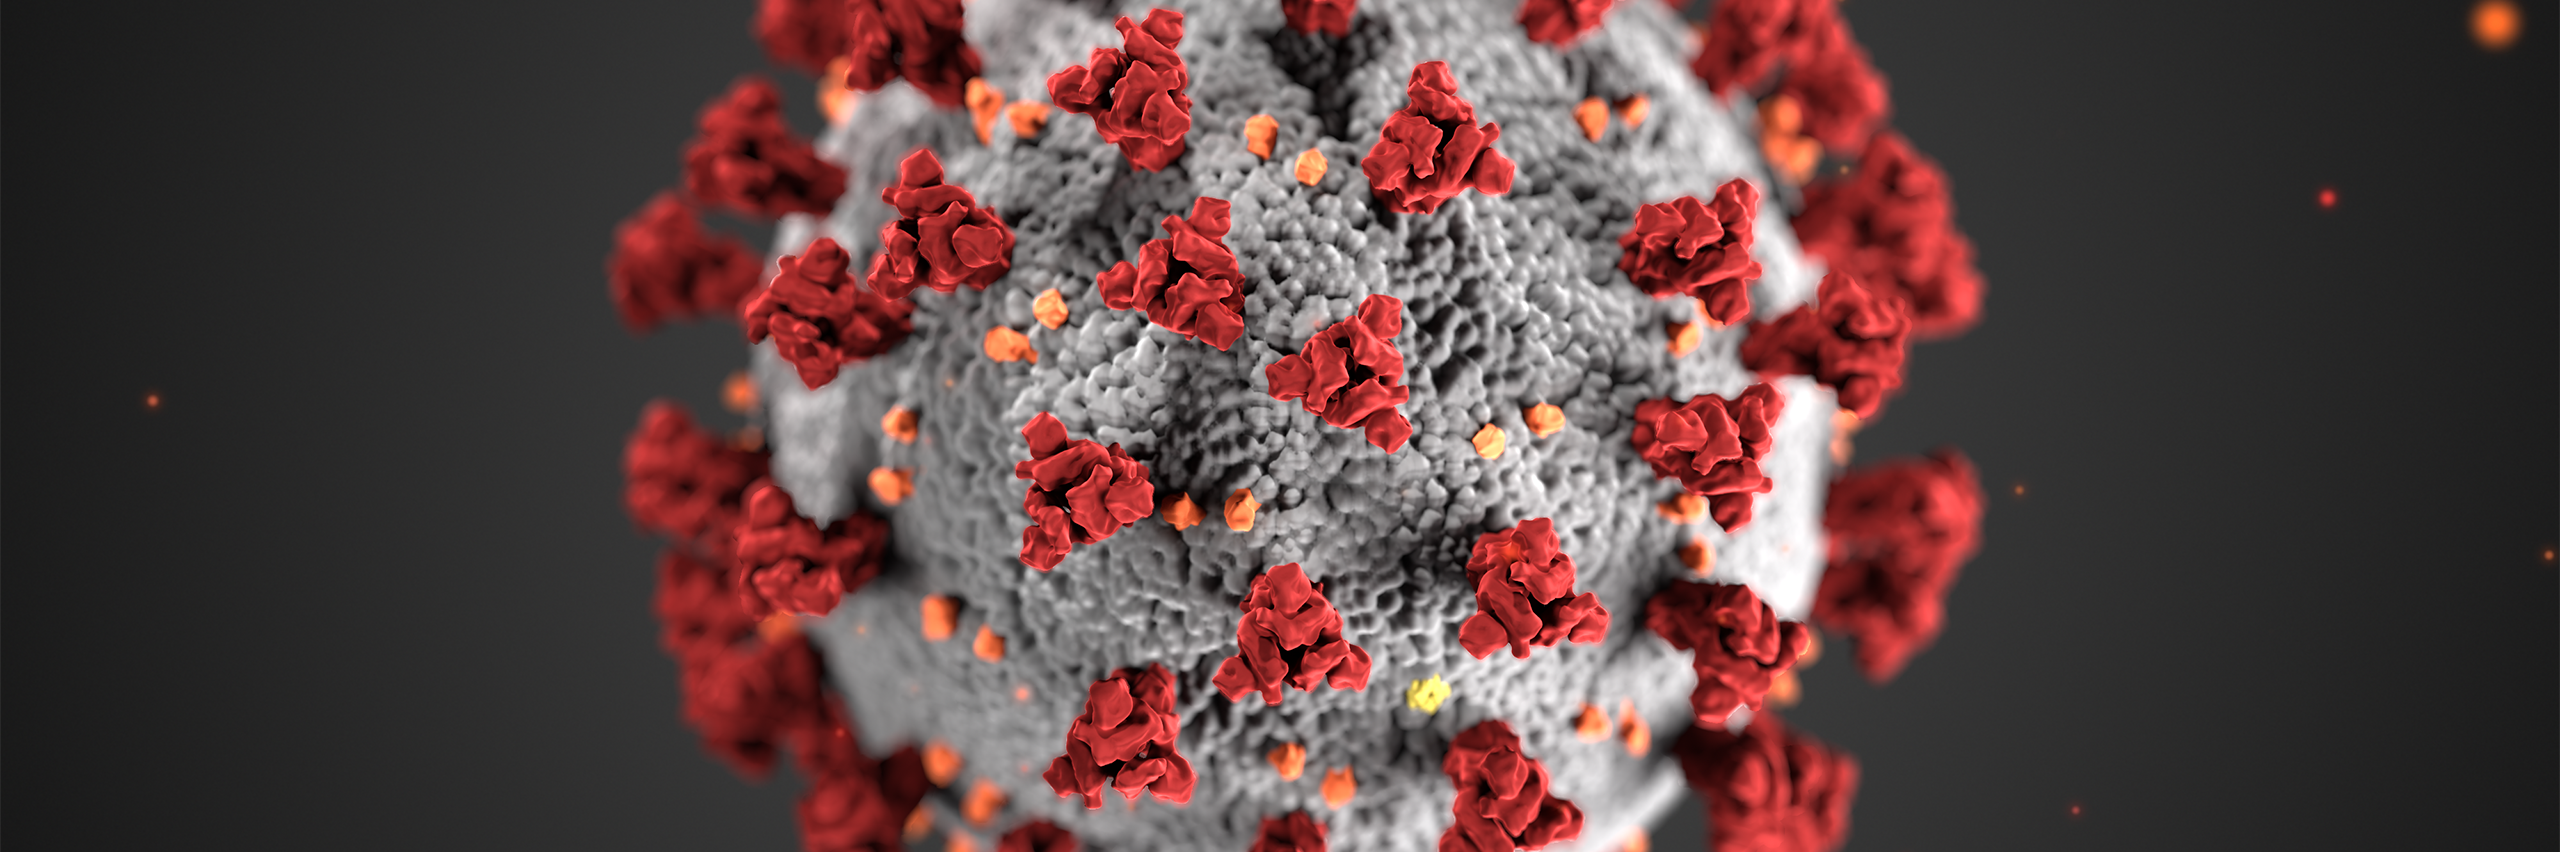 This illustration, created at the Centers for Disease Control and Prevention (CDC), reveals ultrastructural morphology exhibited by coronaviruses. Note the spikes that adorn the outer surface of the virus, which impart the look of a corona surrounding the virion, when viewed electron microscopically. A novel coronavirus, named Severe Acute Respiratory Syndrome coronavirus 2 (SARS-CoV-2), was identified as the cause of an outbreak of respiratory illness first detected in Wuhan, China in 2019. The illness caused by this virus has been named coronavirus disease 2019 (COVID-19). [CDC Image - Photo Credit: Alissa Eckert, MS; Dan Higgins, MAM]